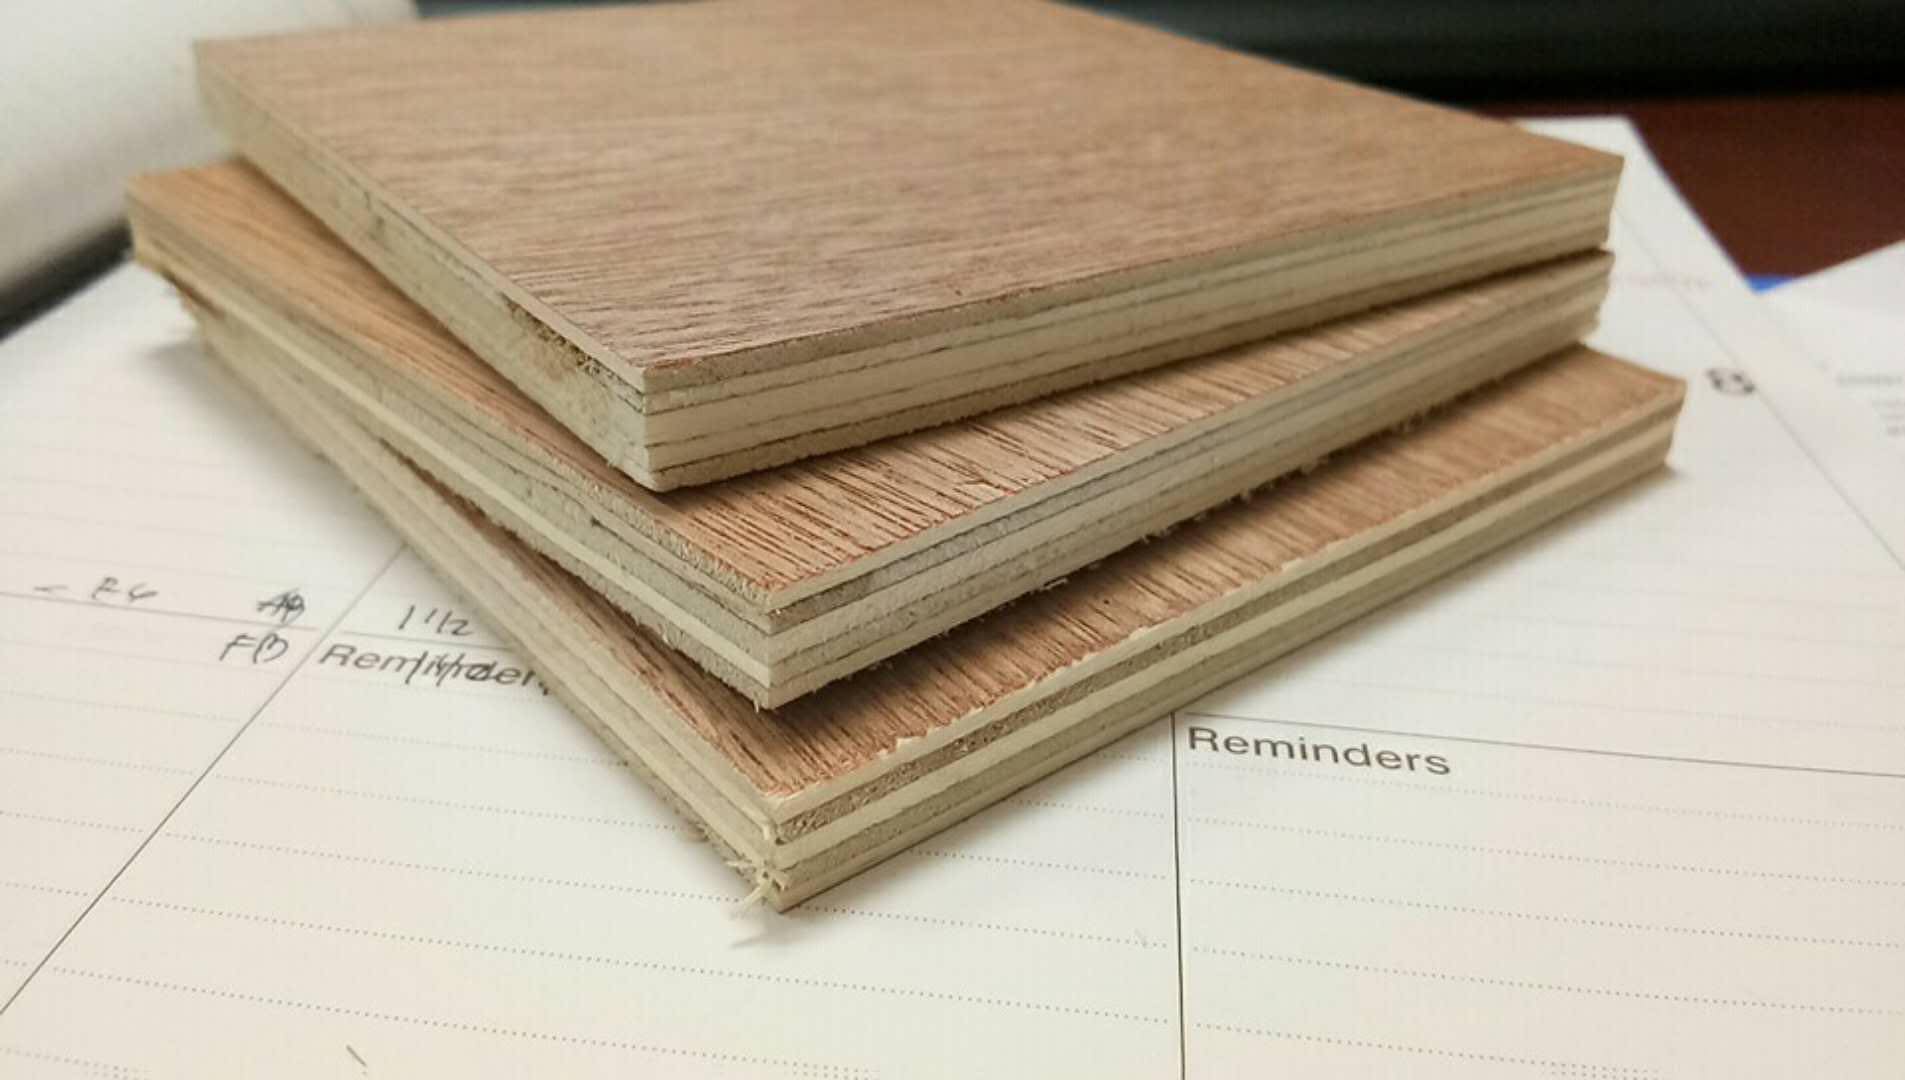 Plywood available in the Philippines